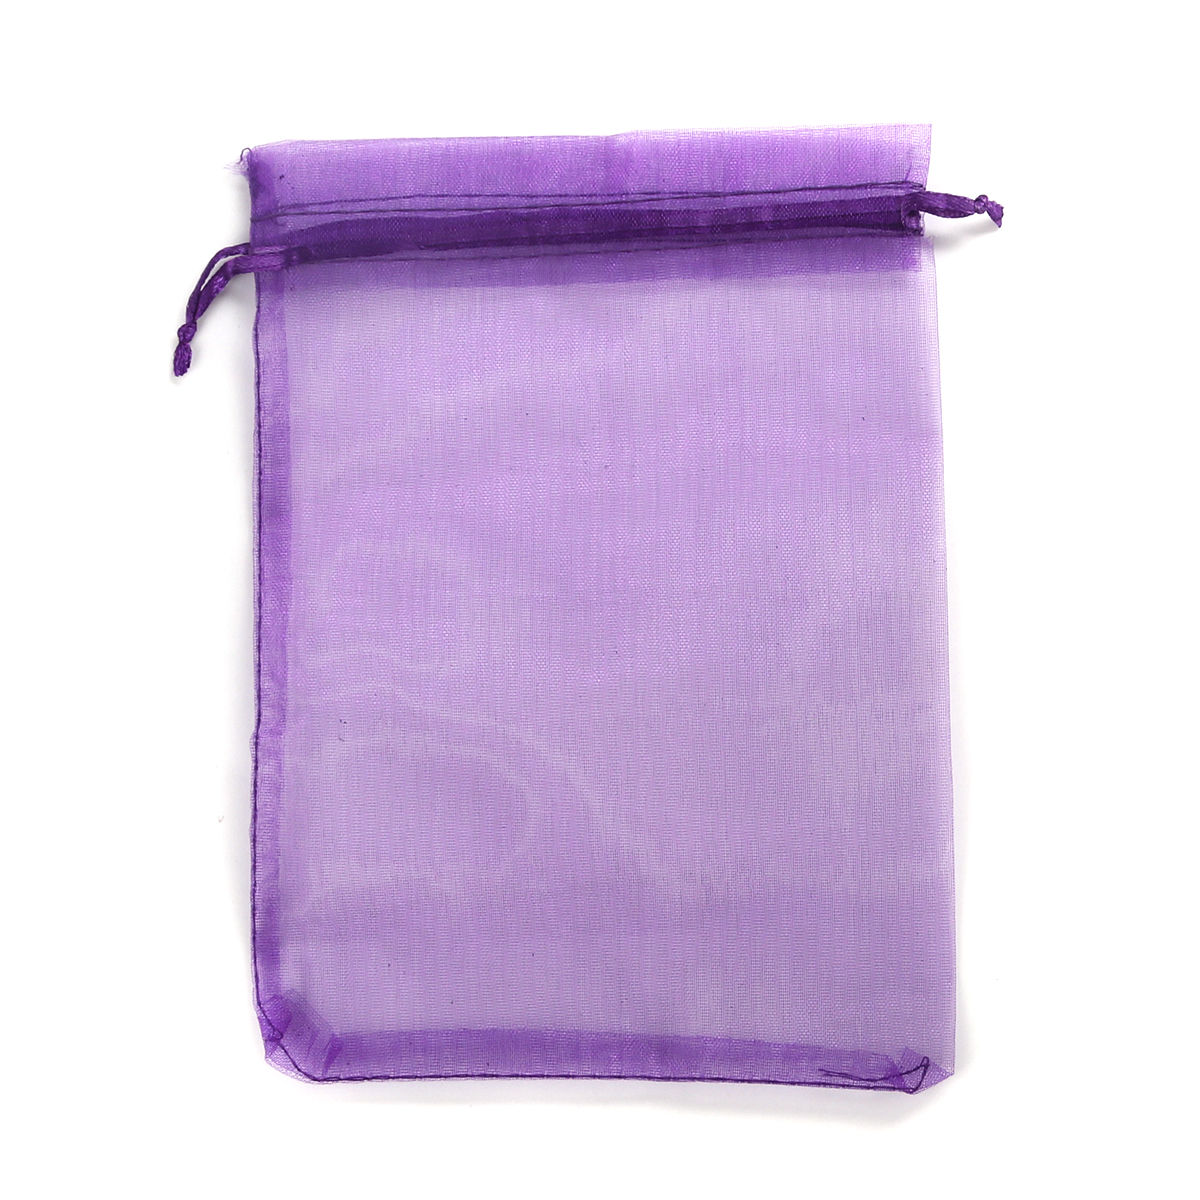 Picture of Wedding Gift Organza Jewelry Bags Drawstring Rectangle Dark Purple (Usable Space: 15.5x12.5cm) 18cm x 12.8cm, 20 PCs